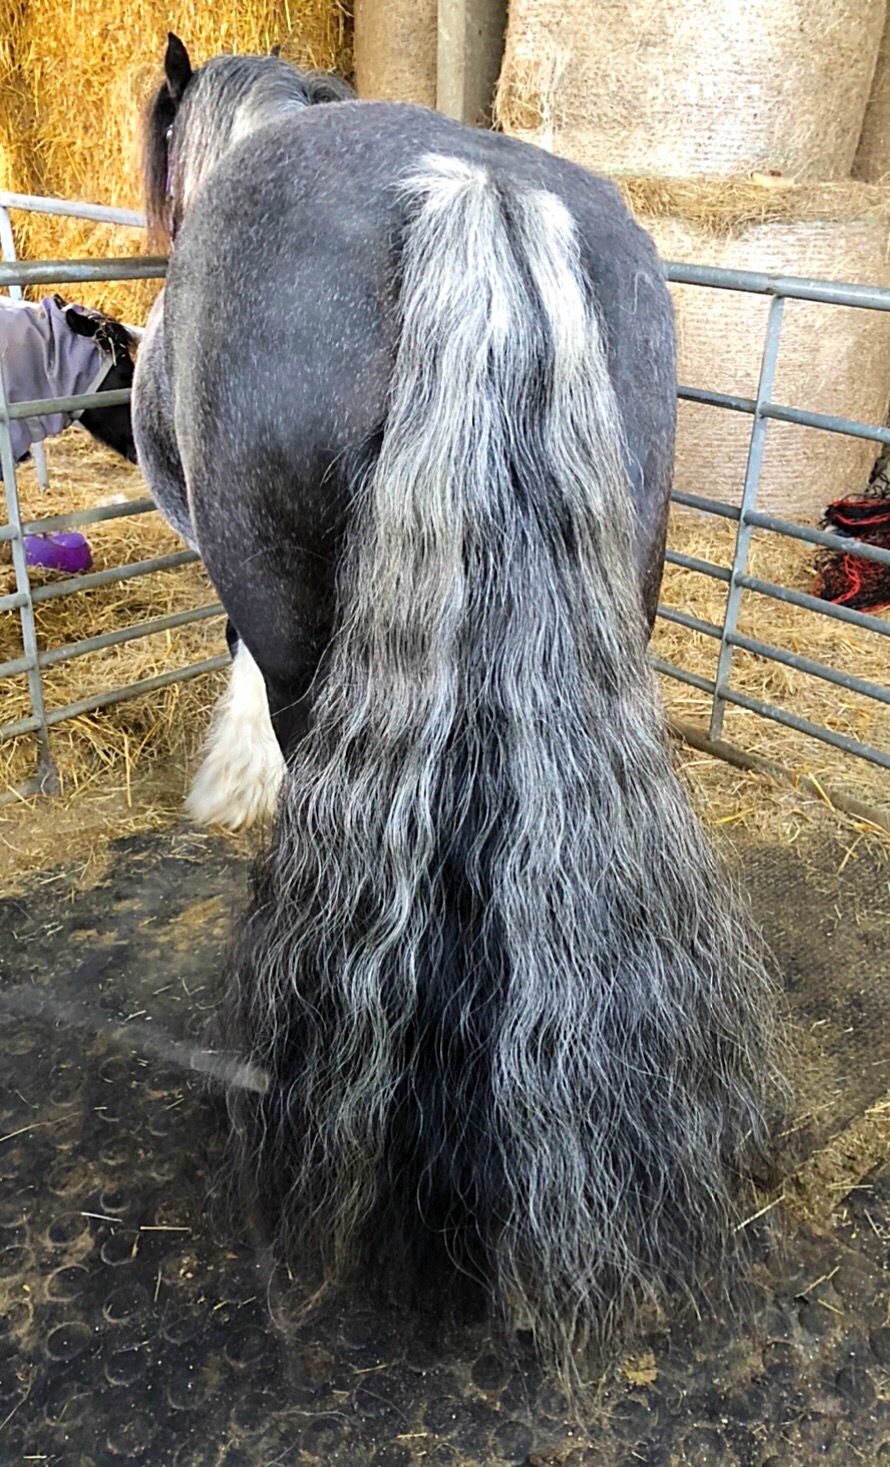 trophy-tails-waterproof-tail-bag-specialist-cob-tail-bag-results-hairy-horsesJPG